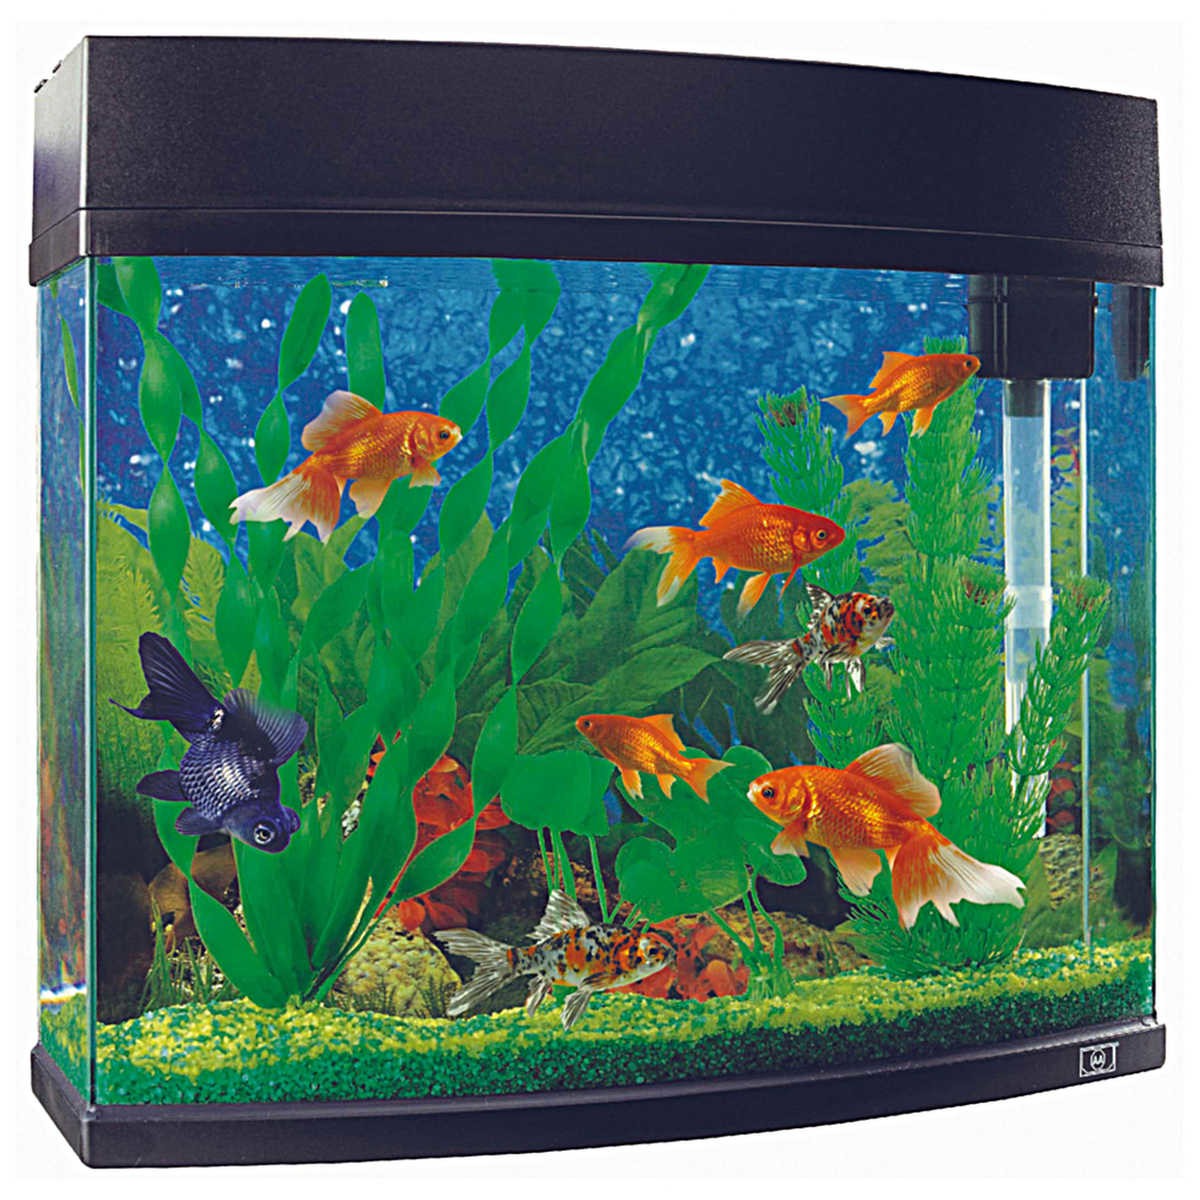 Cheap Fish Tanks And Aquariums Tips And Guide